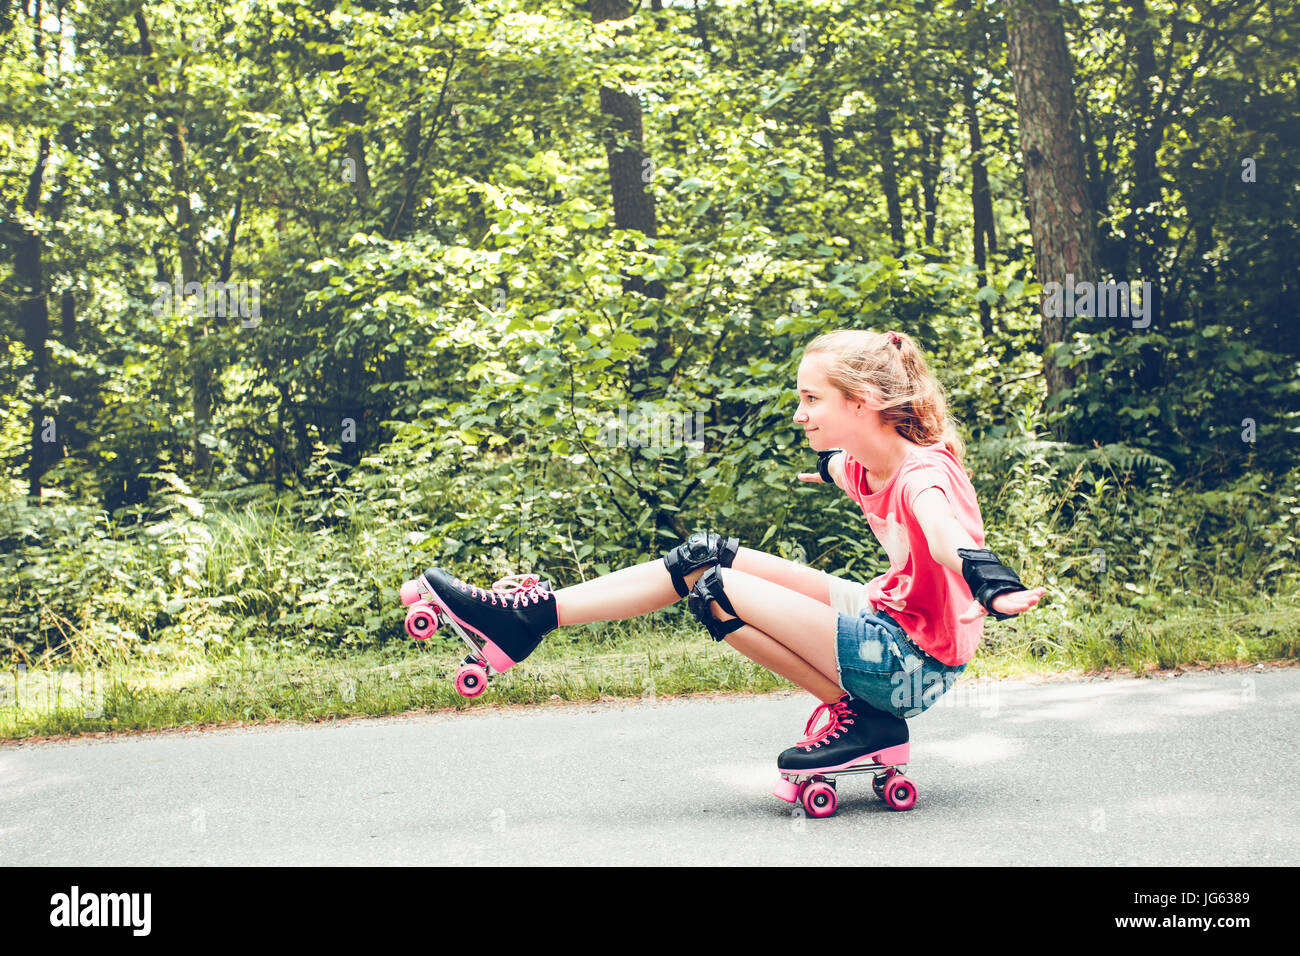 Young girl roller skating down on a forest road on summer day Stock Photo